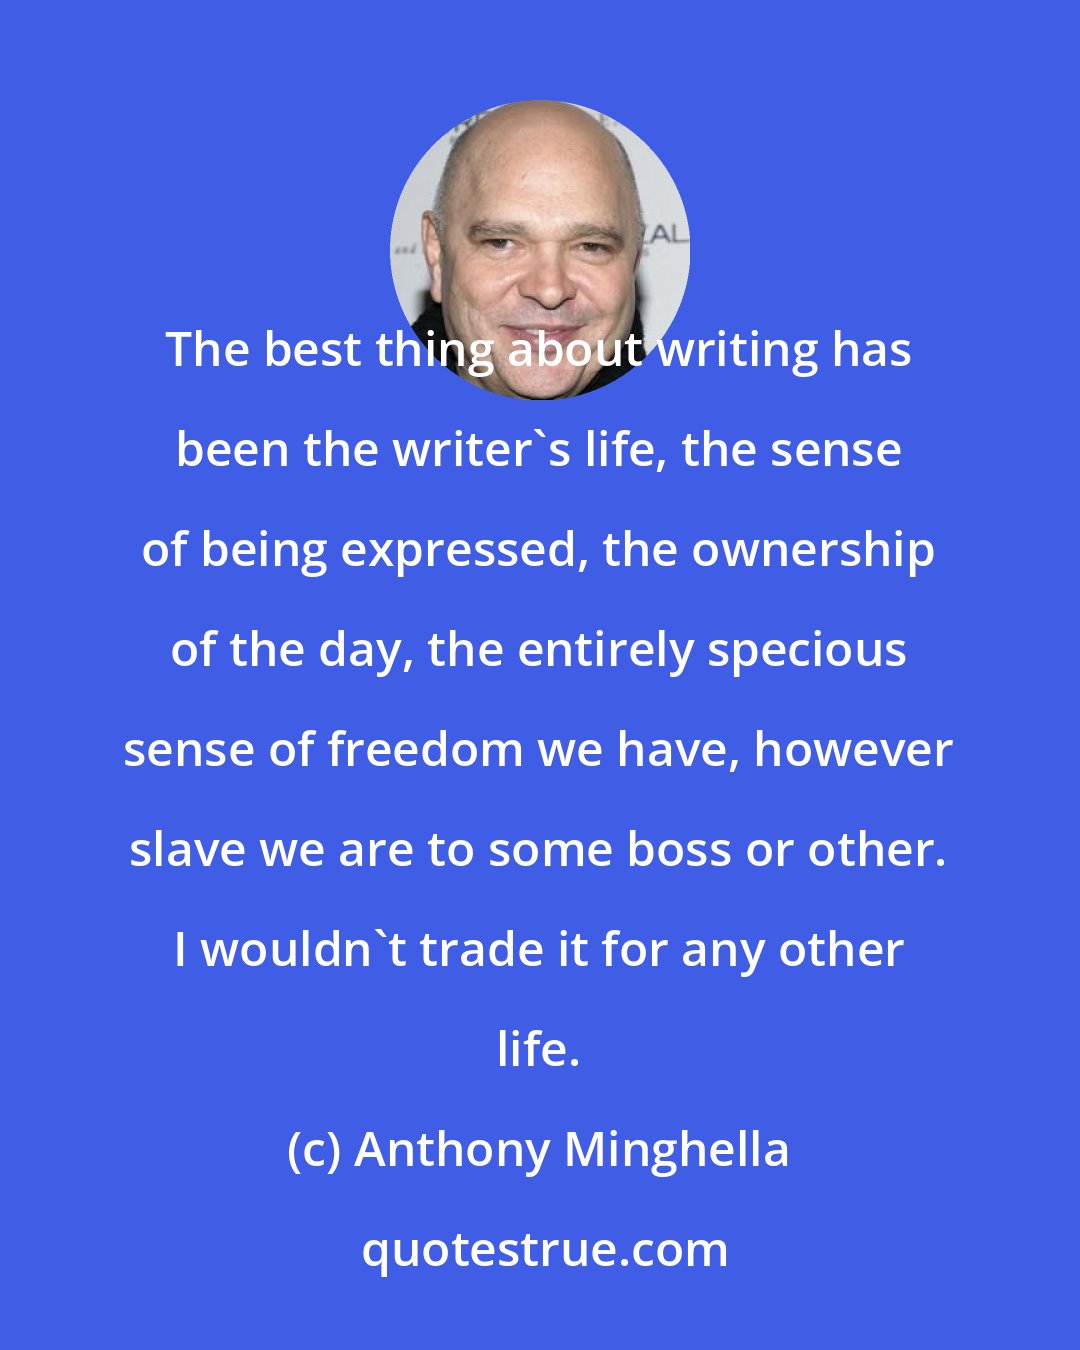 Anthony Minghella: The best thing about writing has been the writer's life, the sense of being expressed, the ownership of the day, the entirely specious sense of freedom we have, however slave we are to some boss or other. I wouldn't trade it for any other life.